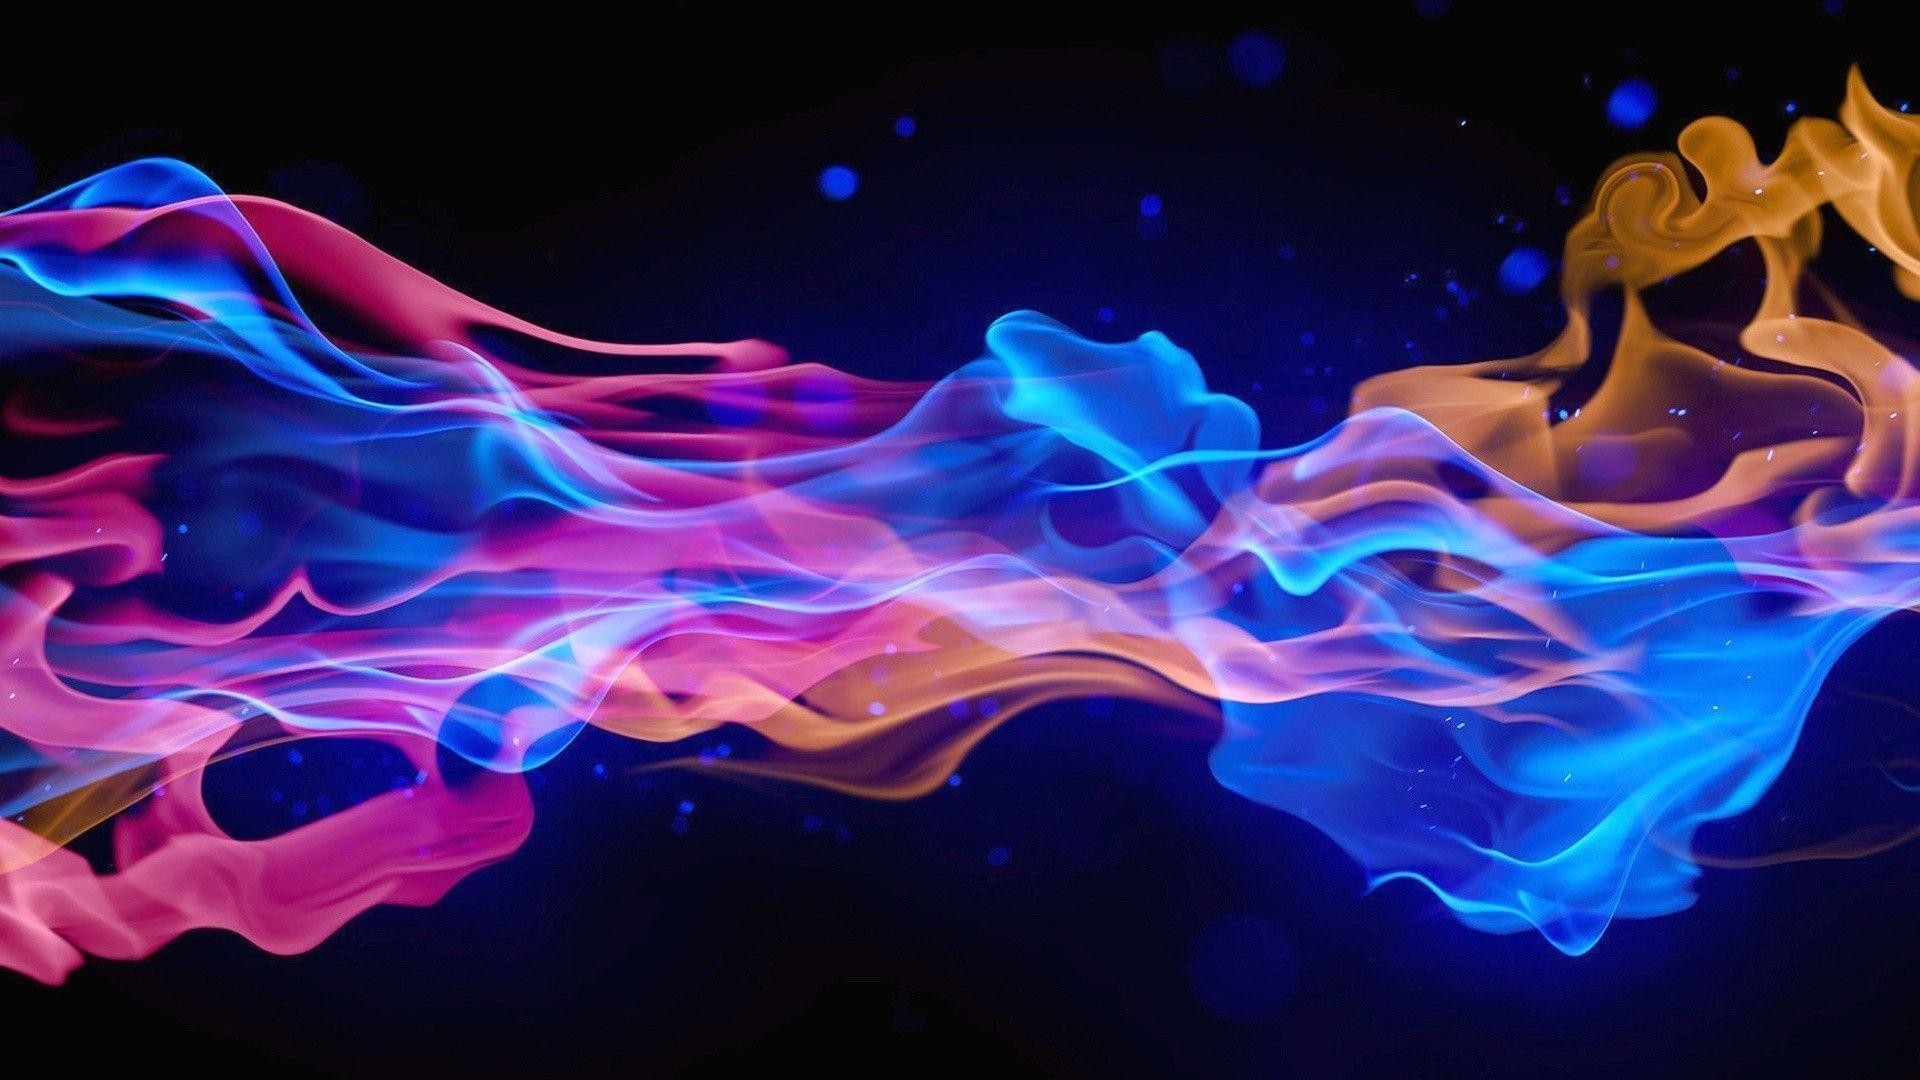 1920x1080 <b>Purple Flames Wallpapers</b> in jpg format for free download